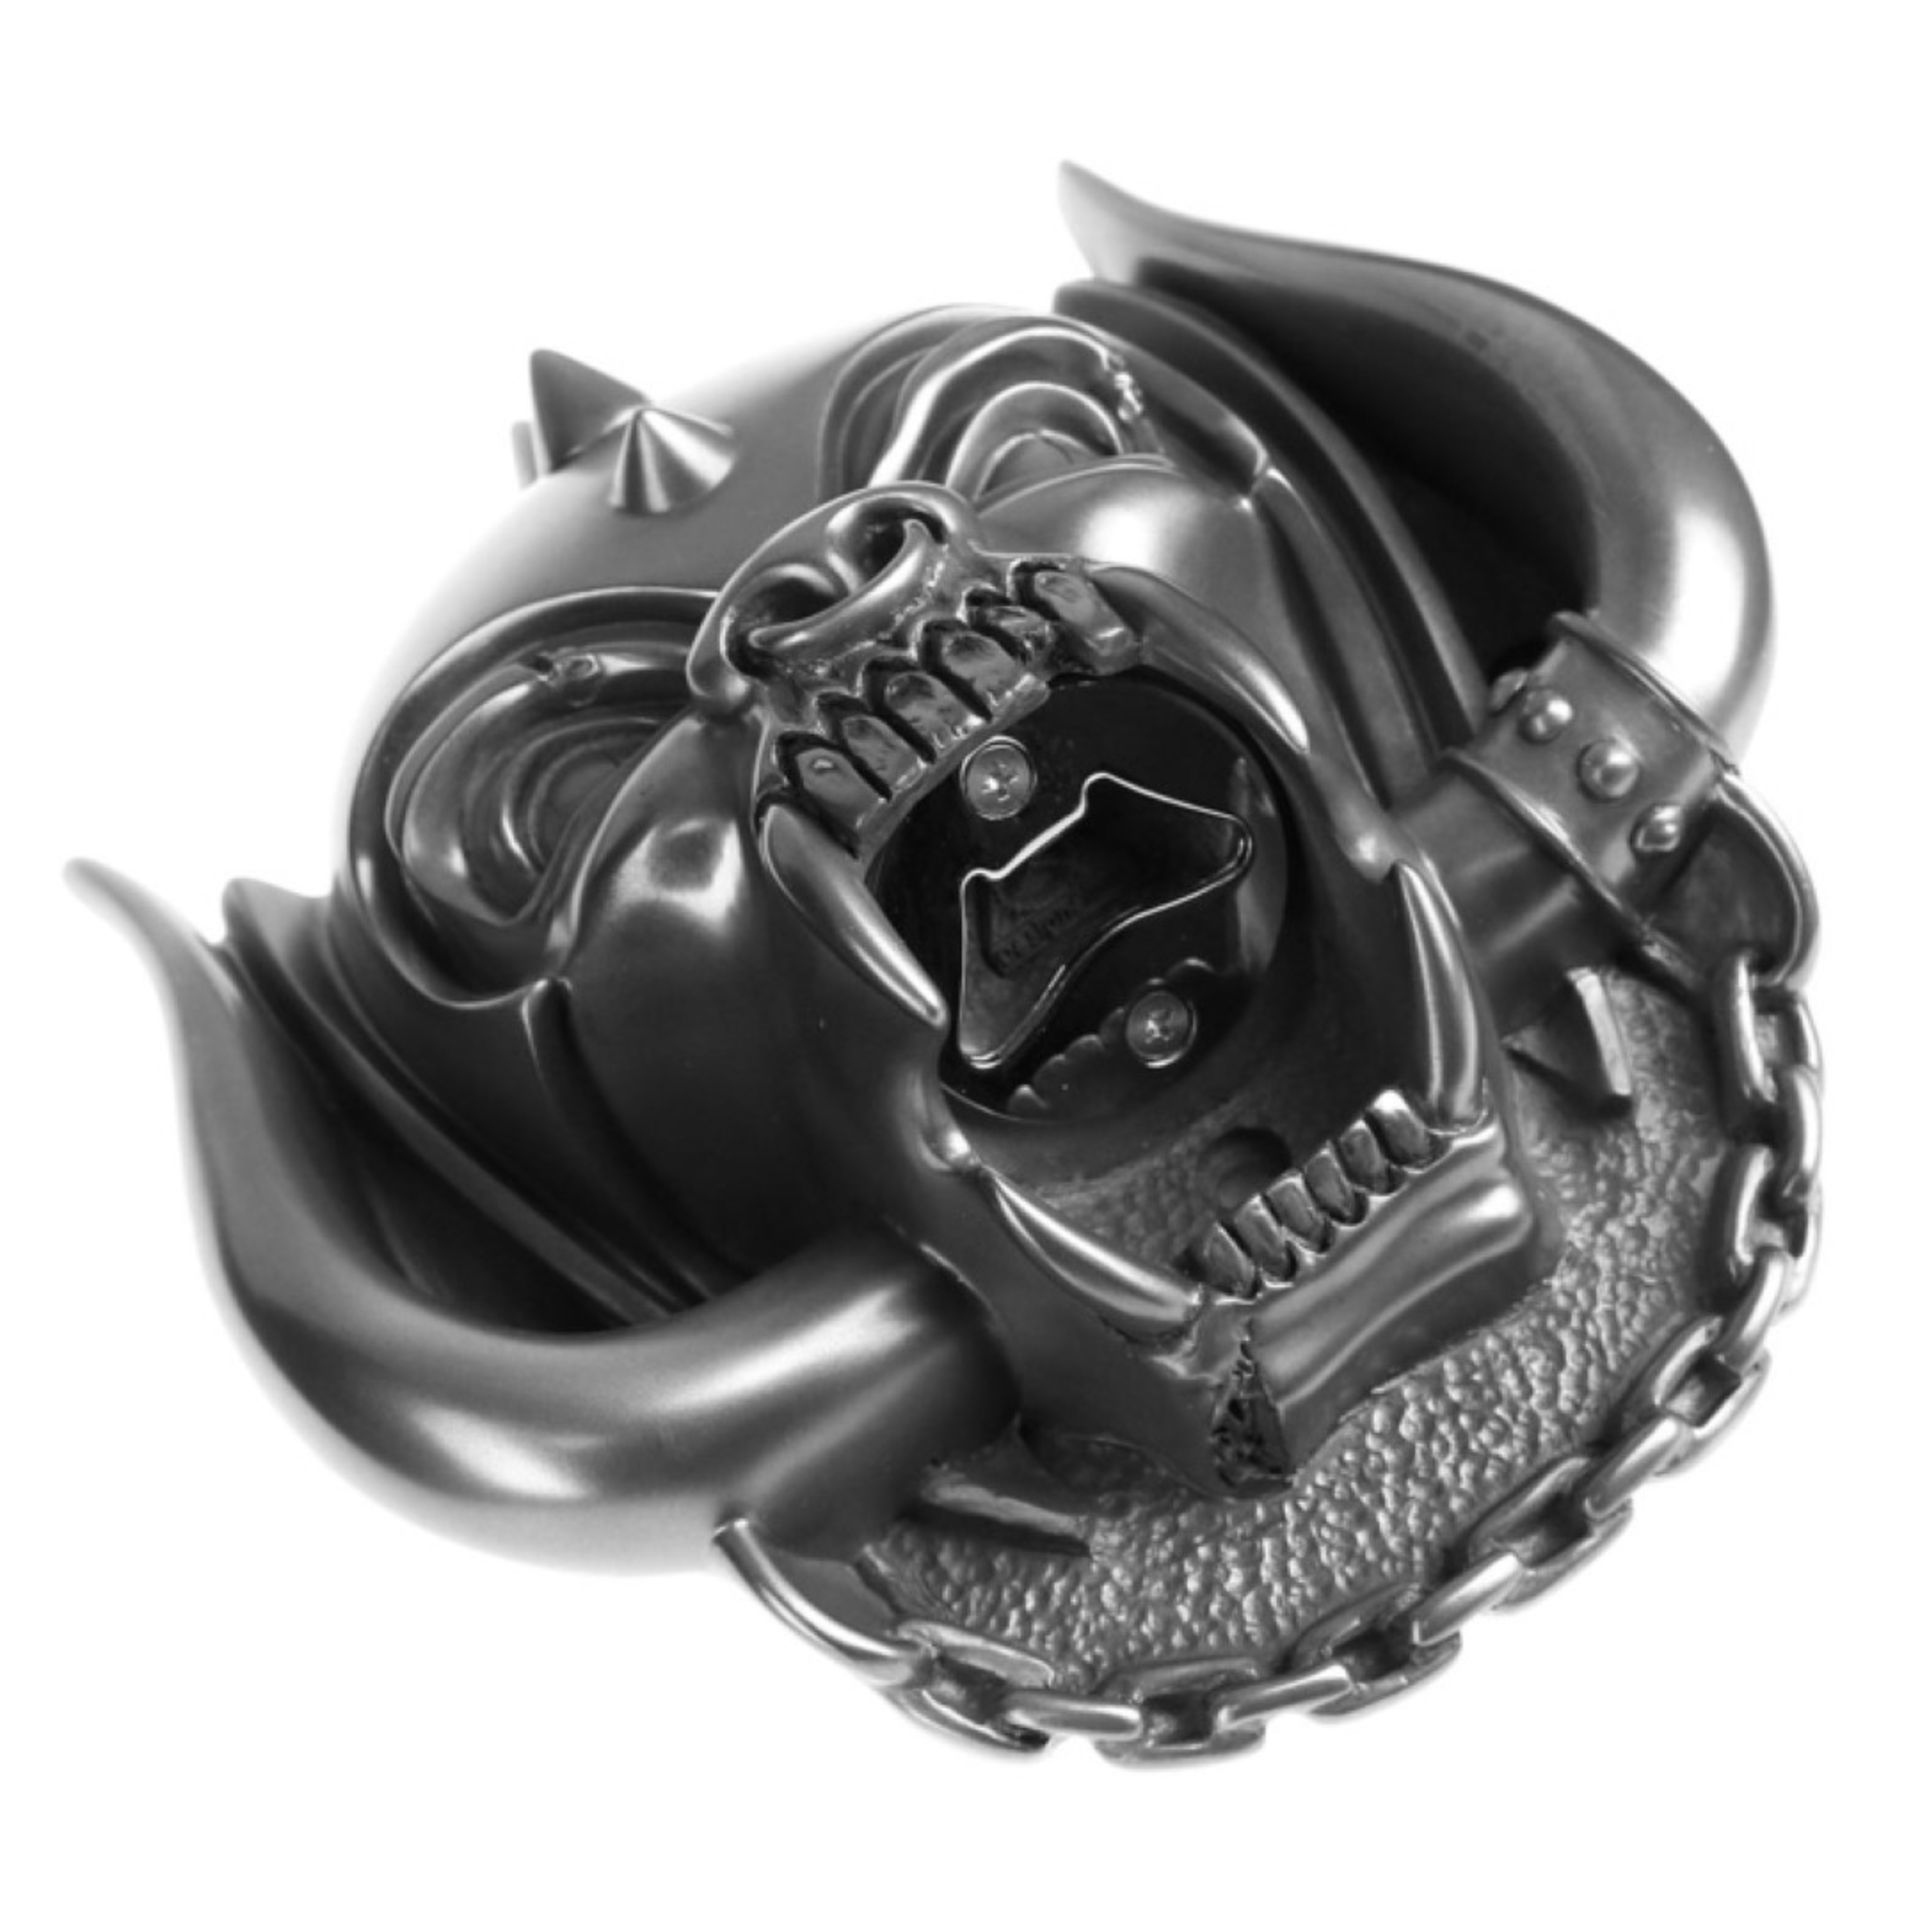 1 x Motorhead Wall Mounted Bottle Opener - Snaggletooth With a Gun Metal Finish - By Beer Buddies - - Image 5 of 12